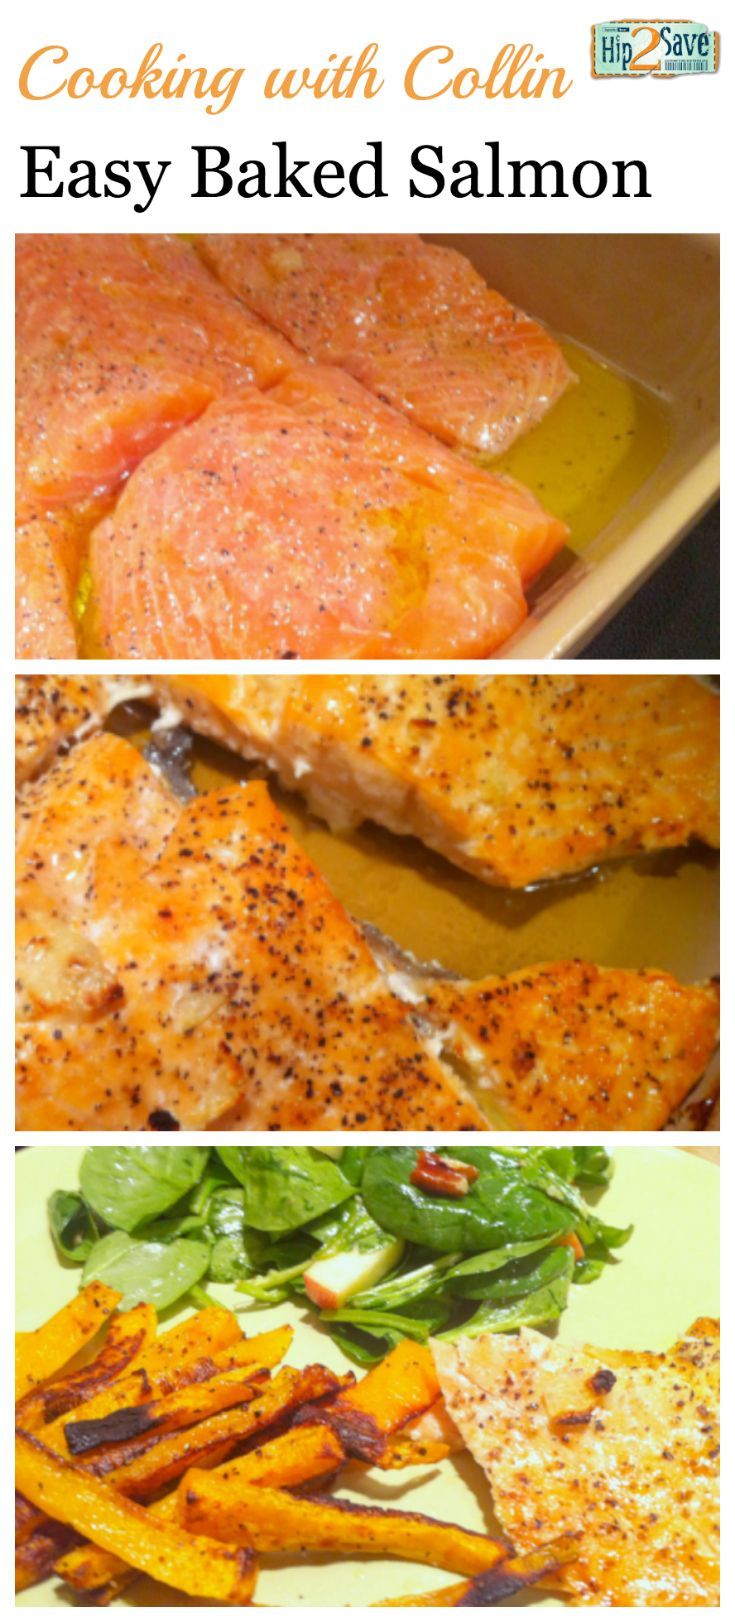 Even if you don’t love salmon, give this easy baked salmon recipe a try – it’s so yummy!! (Especially if you love salmon like me.)